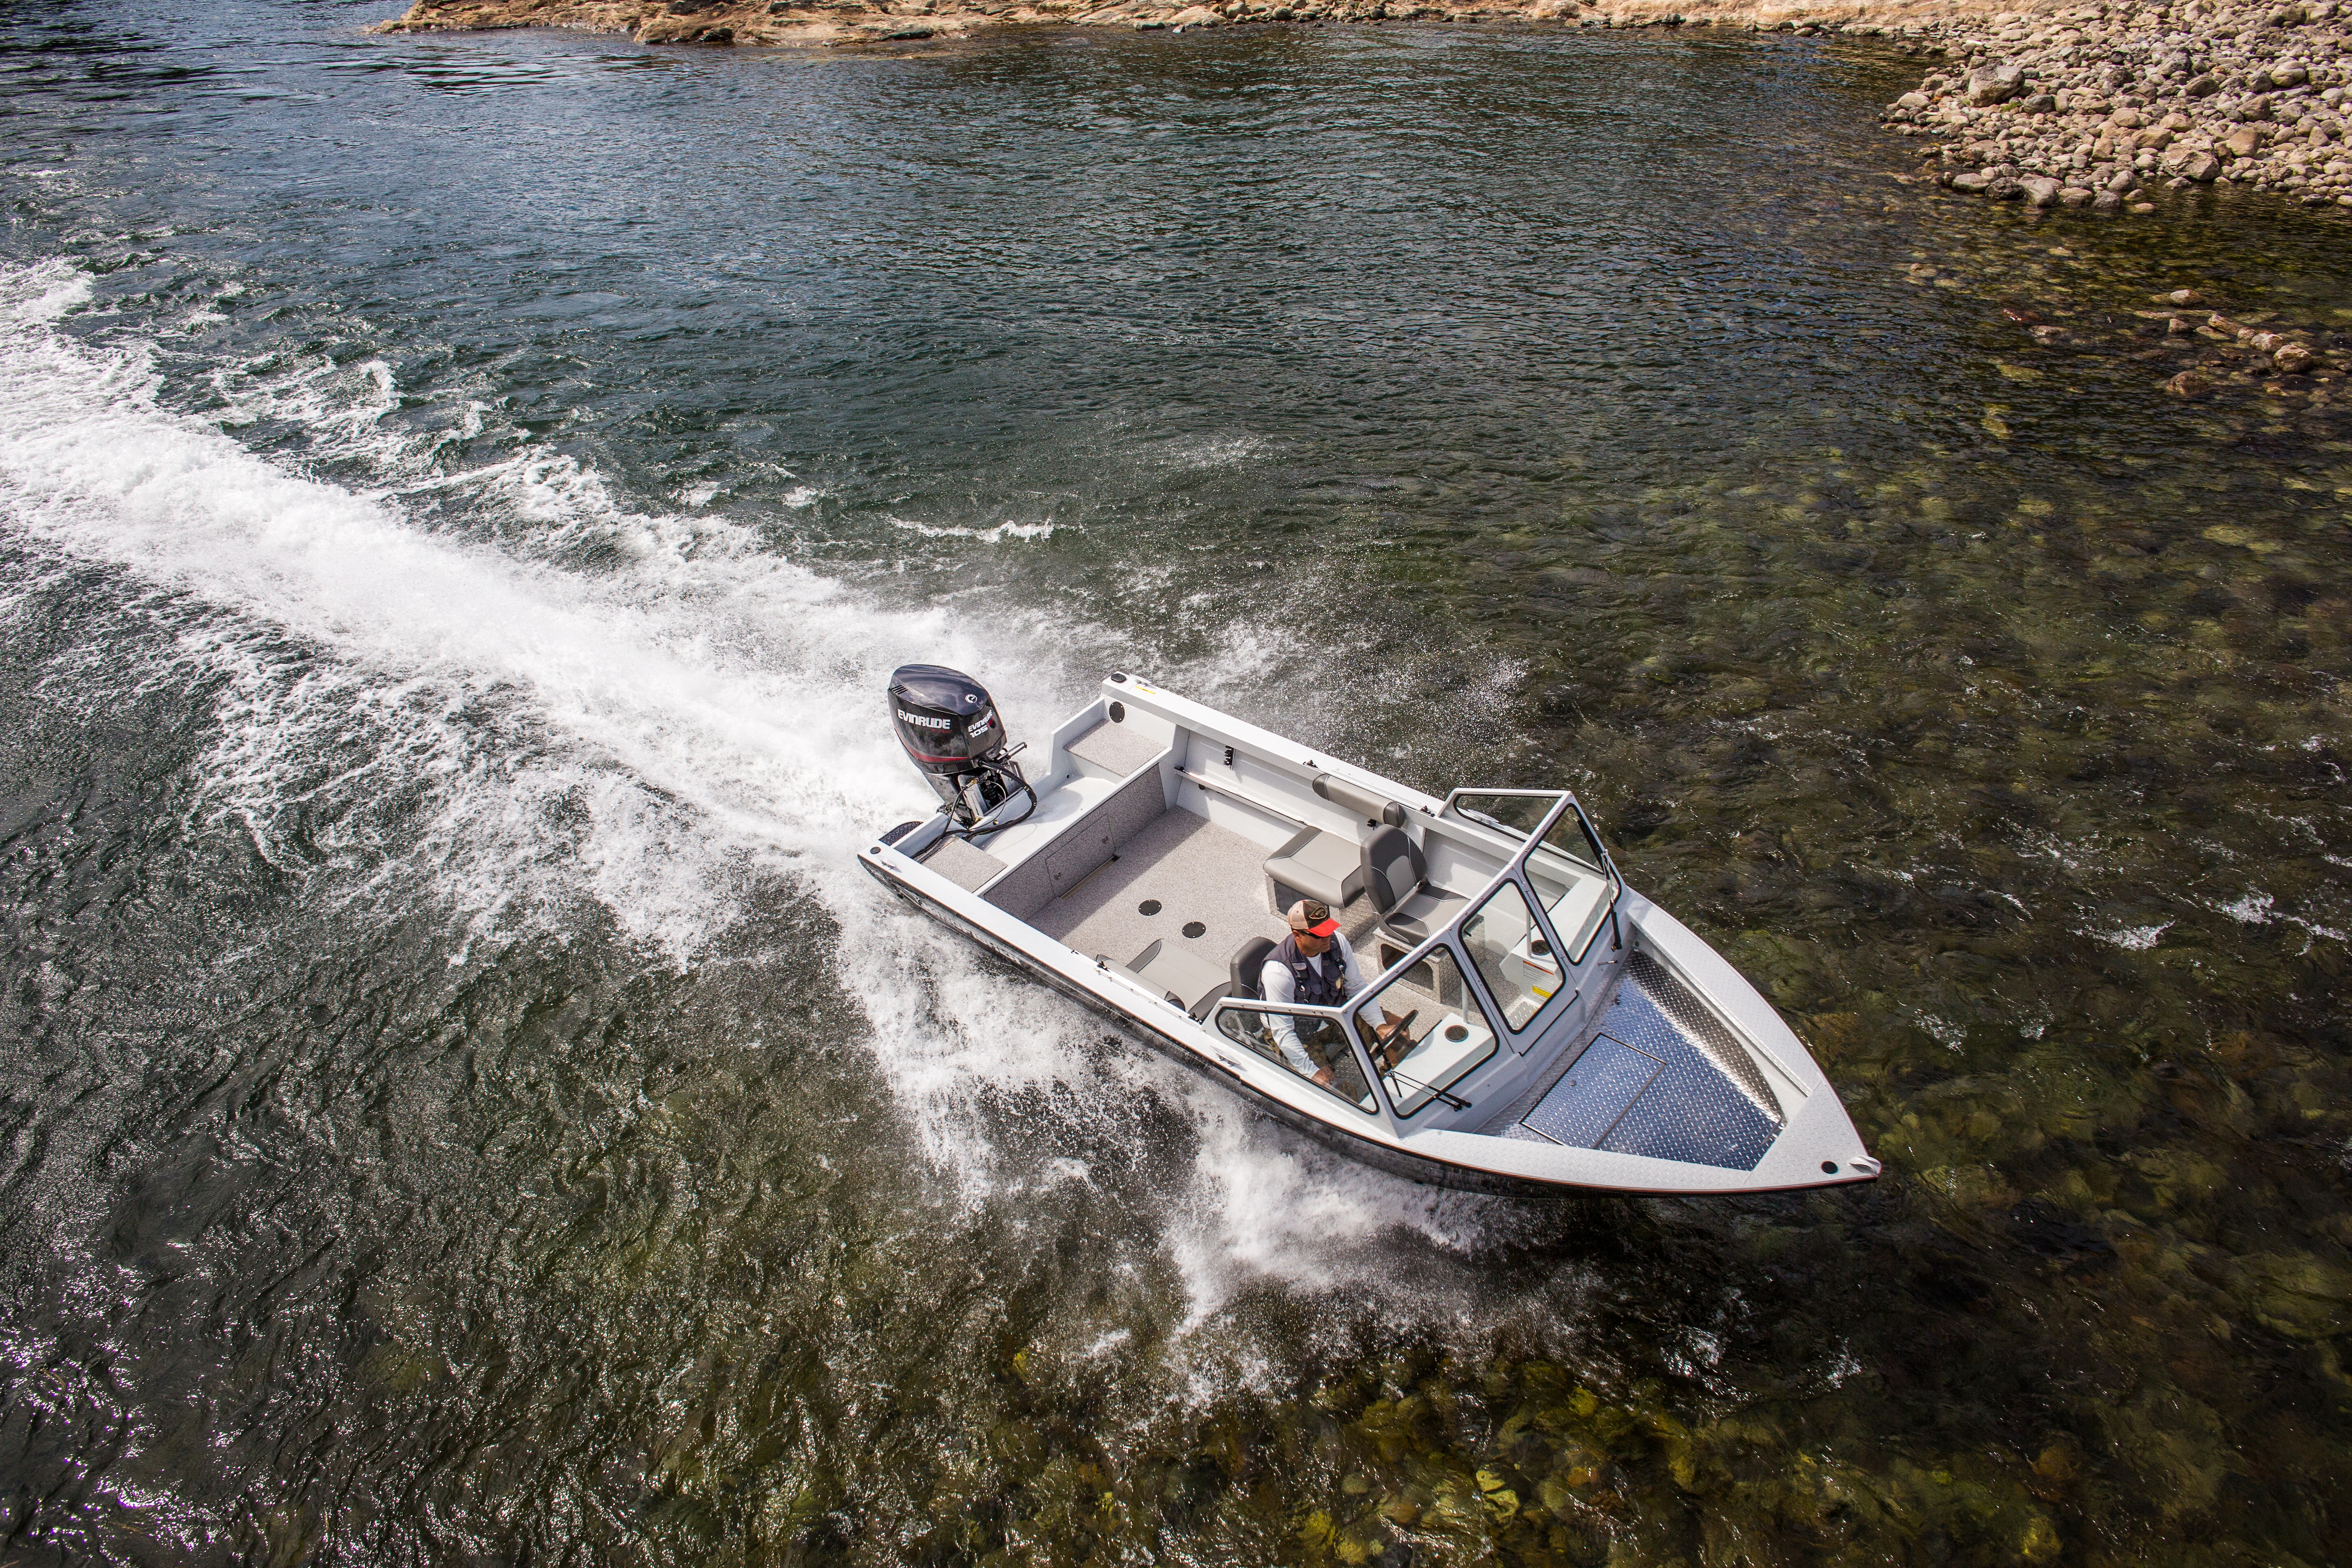 Man driving a Evinrude motorboat in shallow water